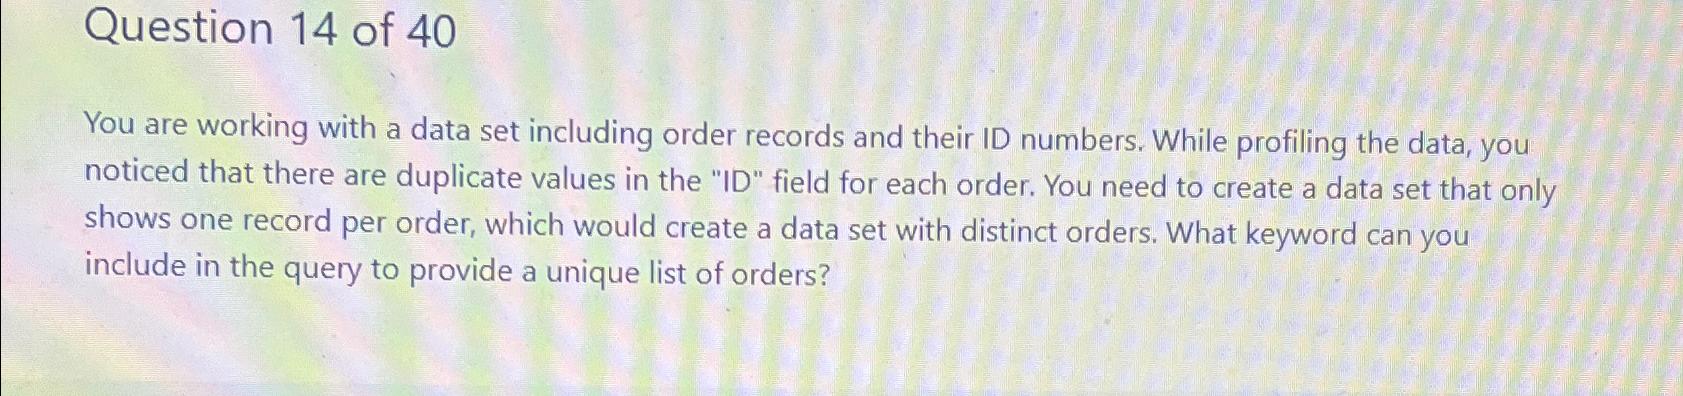 Question 14 of 40 You are working with a data set including order records and their ID numbers. While